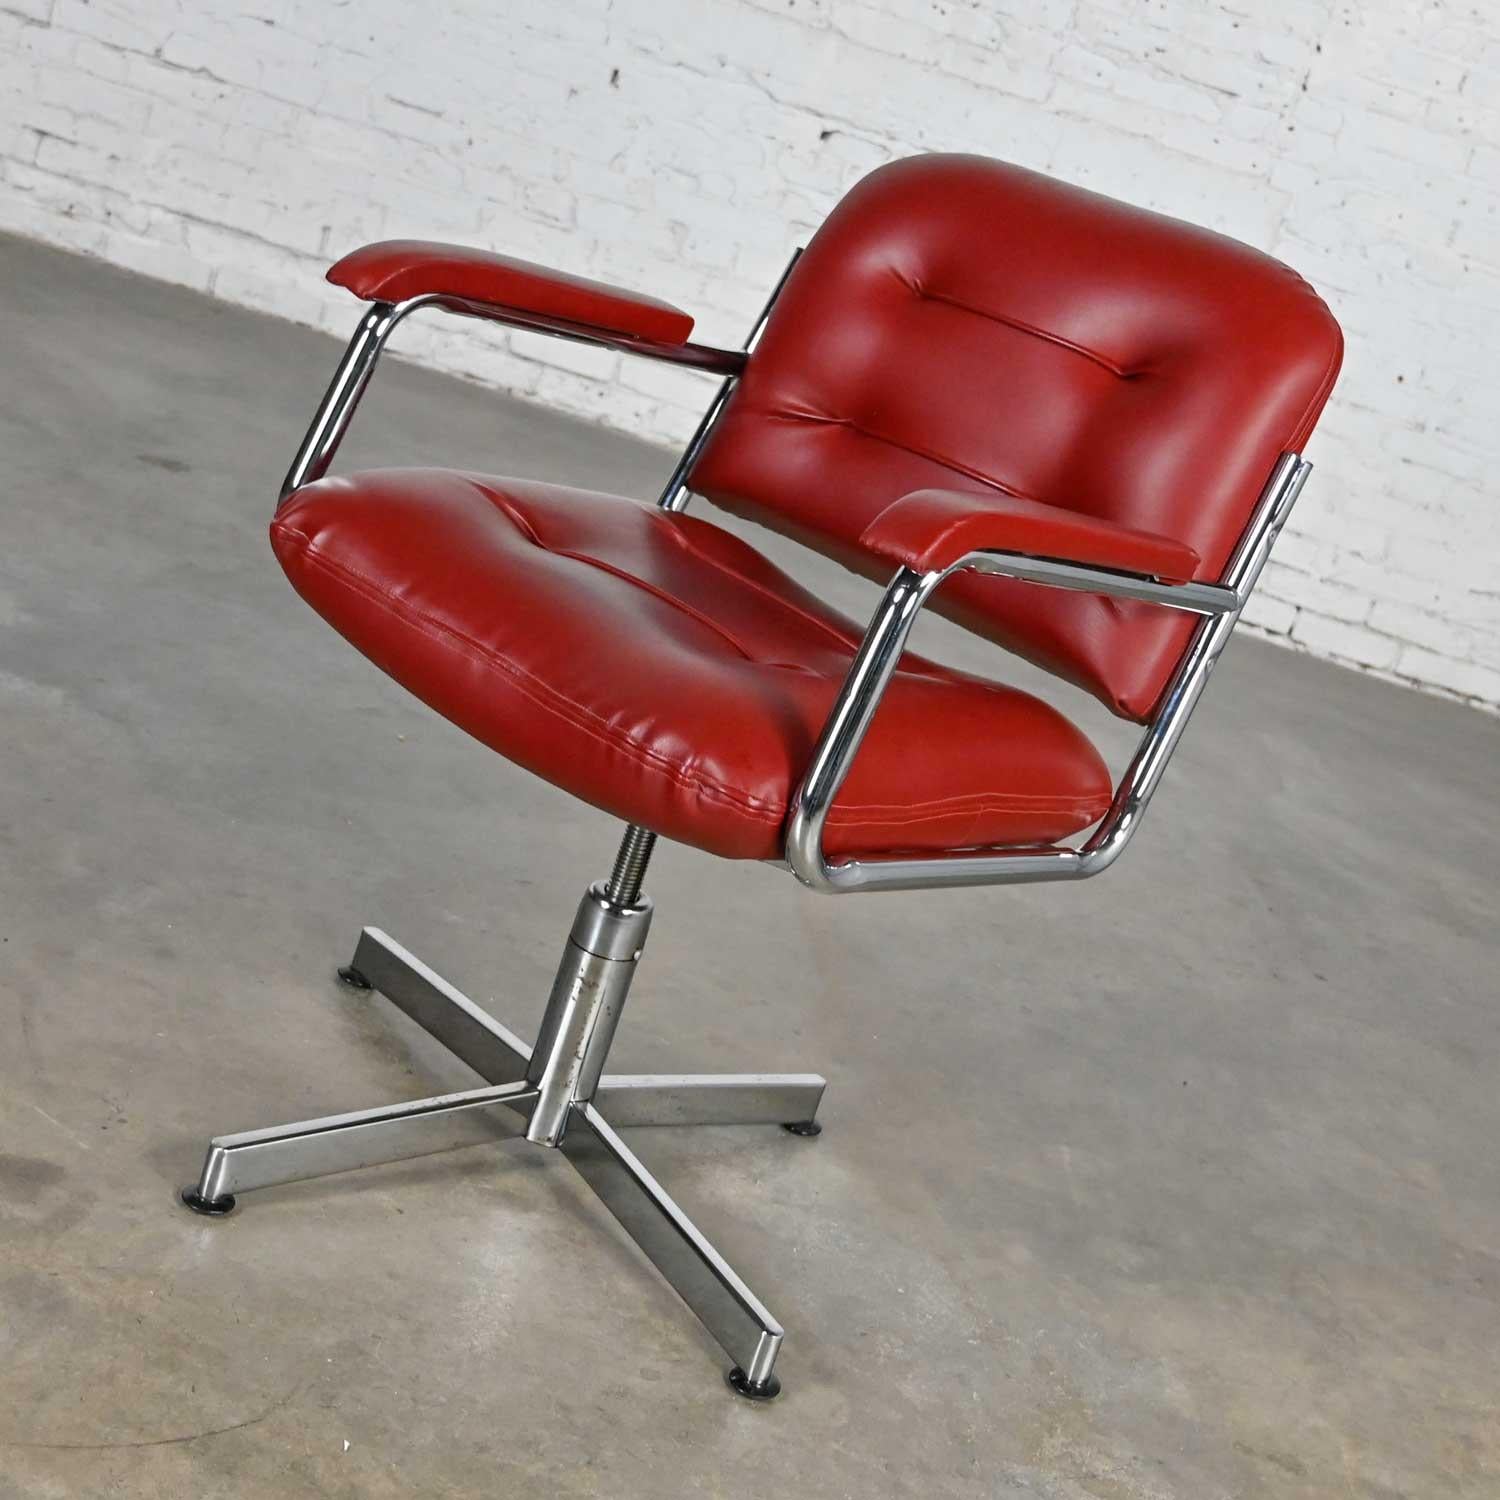 Wonderful vintage Mid-Century Modern cordovan color faux leather & chrome 4 prong base swivel and adjustable height desk chair by Manuchair Industries. Beautiful condition, keeping in mind that this is vintage and not new so will have signs of use